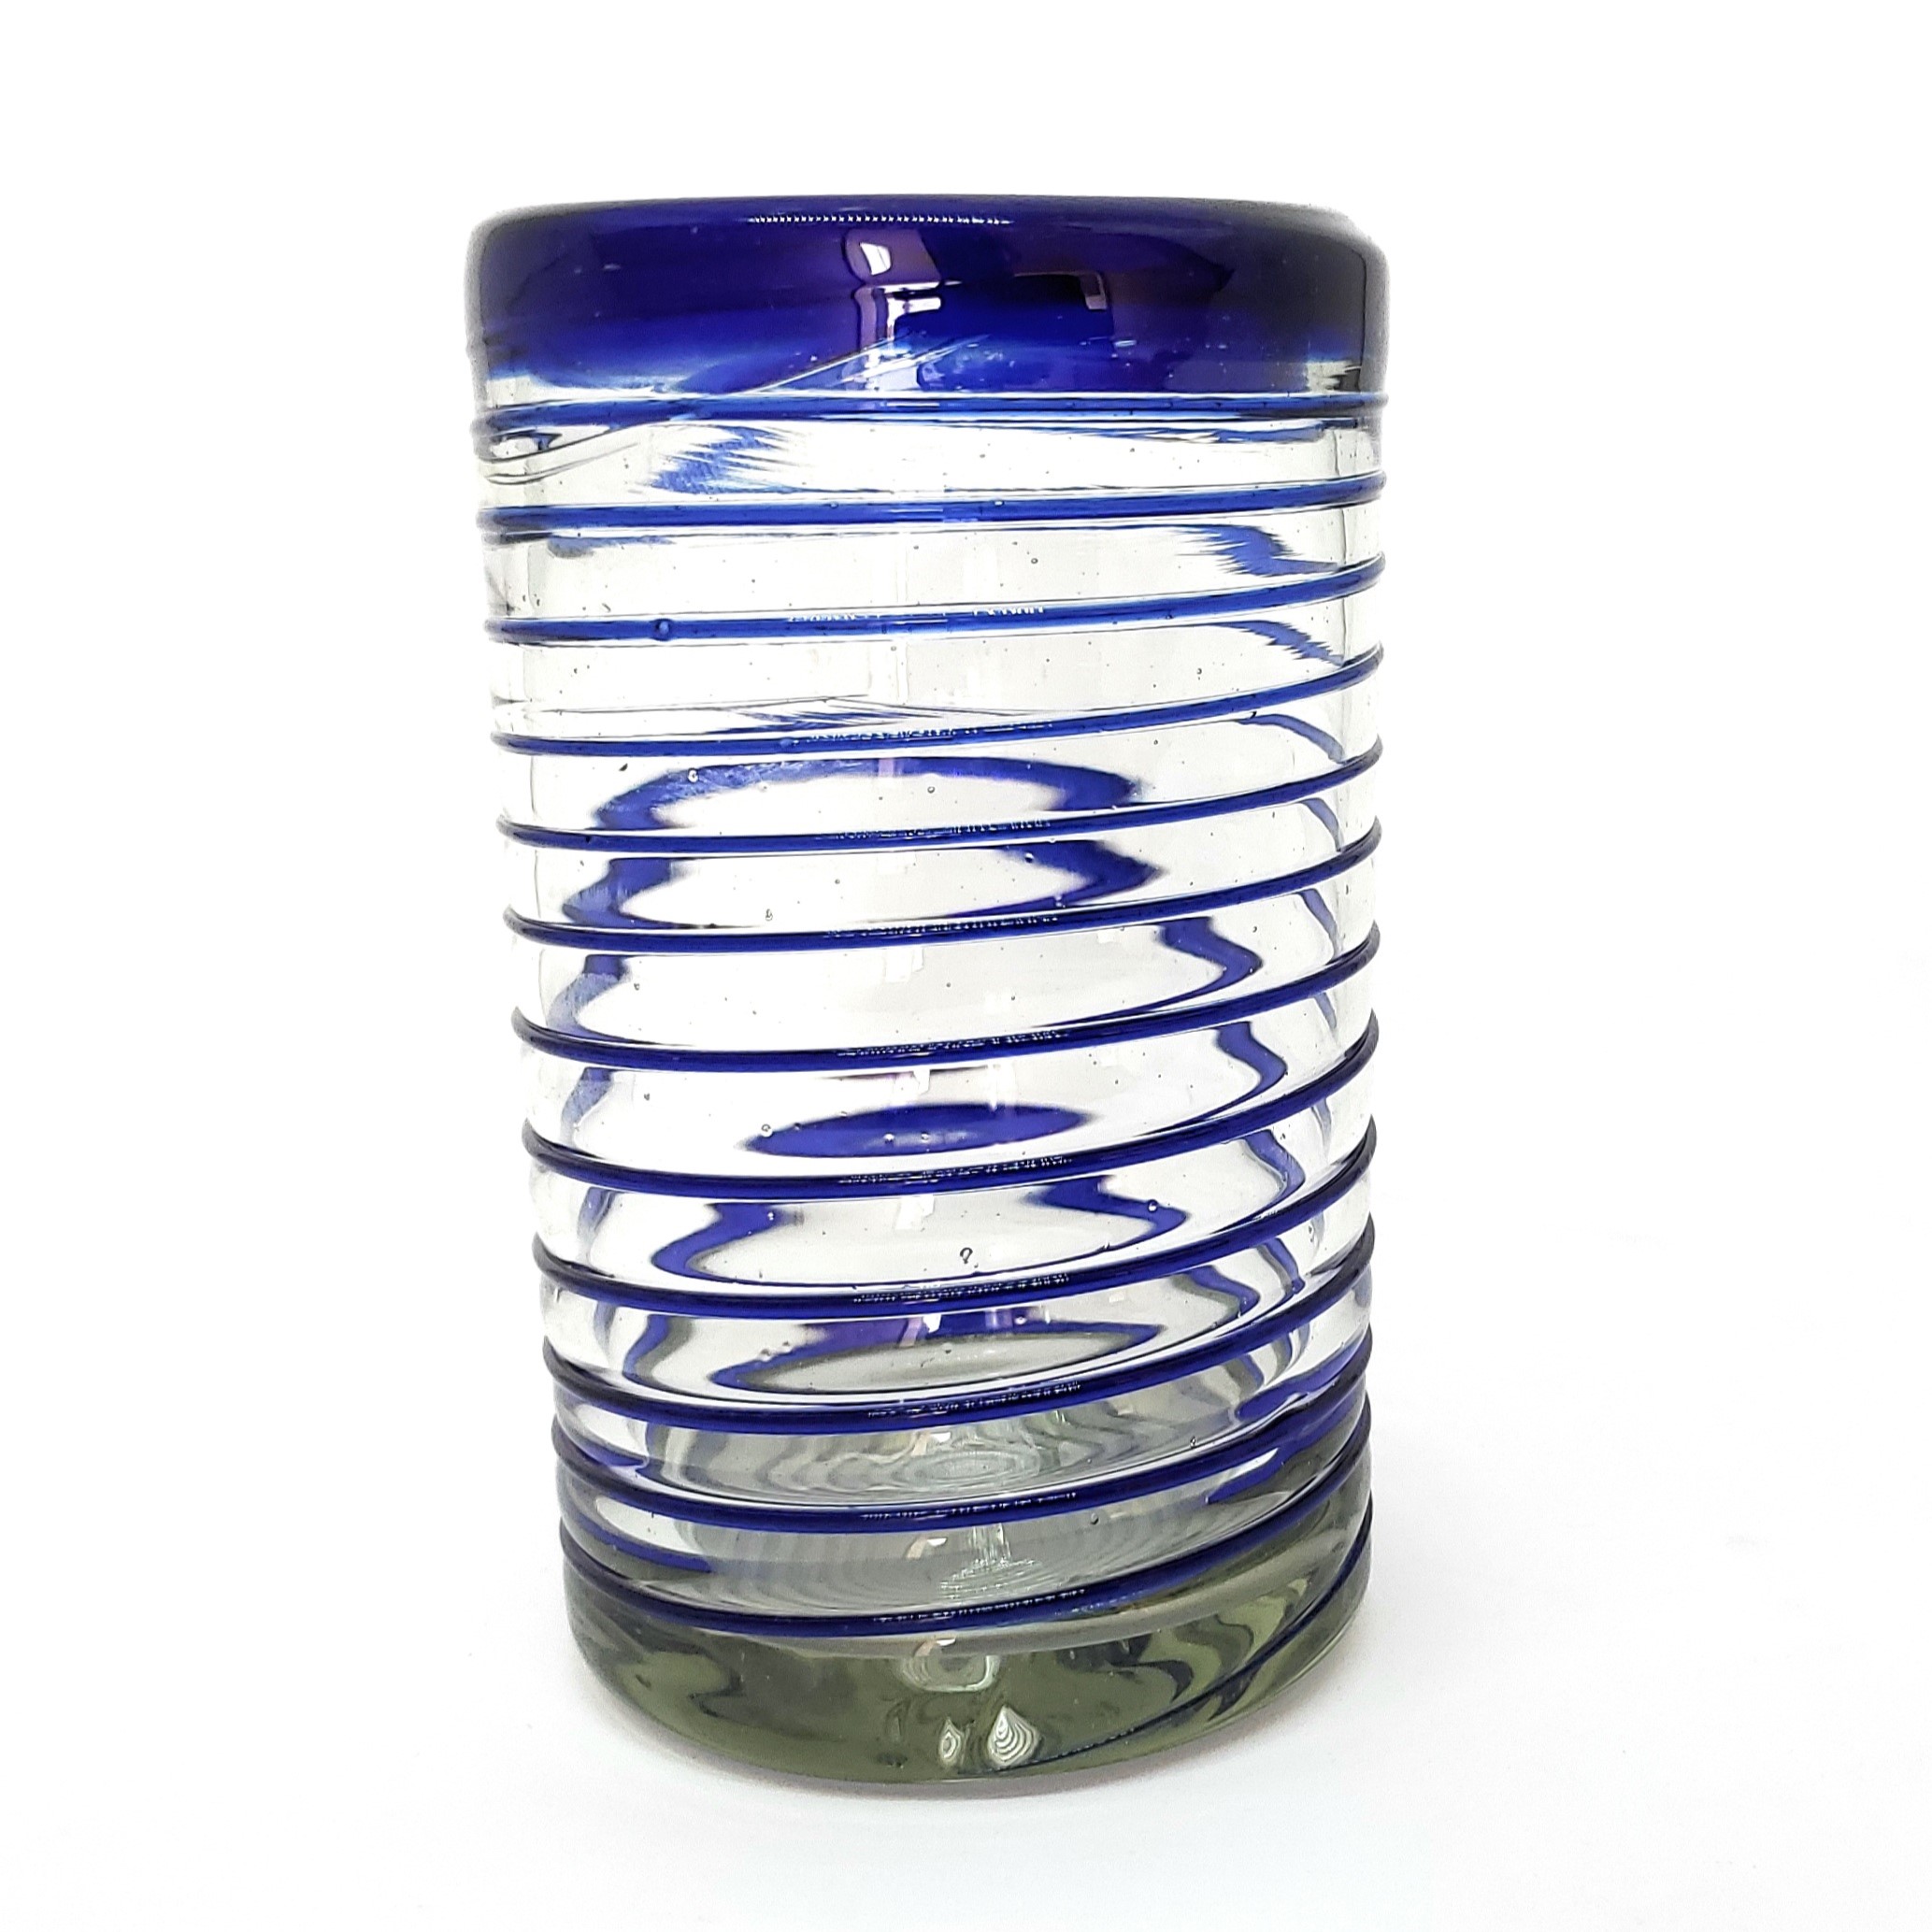 Wholesale Mexican Glasses / Cobalt Blue Spiral 14 oz Drinking Glasses  / These elegant glasses covered in a cobalt blue spiral will add a handcrafted touch to your kitchen decor.